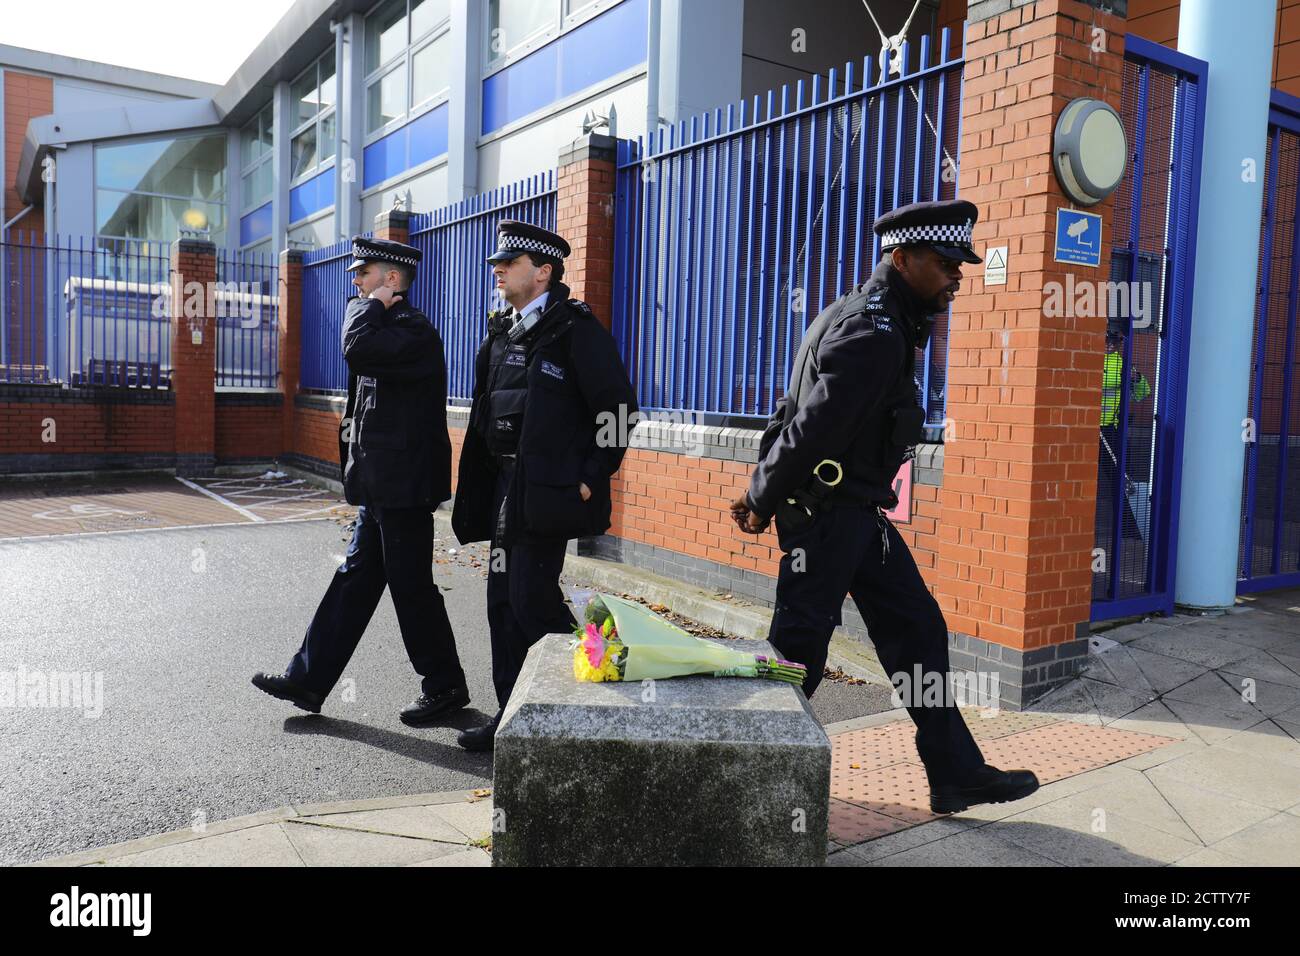 Police officers walk past flowers left outside Croydon Custody Centre in south London where a police officer was shot by a man who was being detained in the early hours of Friday morning. The officer was treated at the scene before being taken to hospital where he subsequently died. Stock Photo